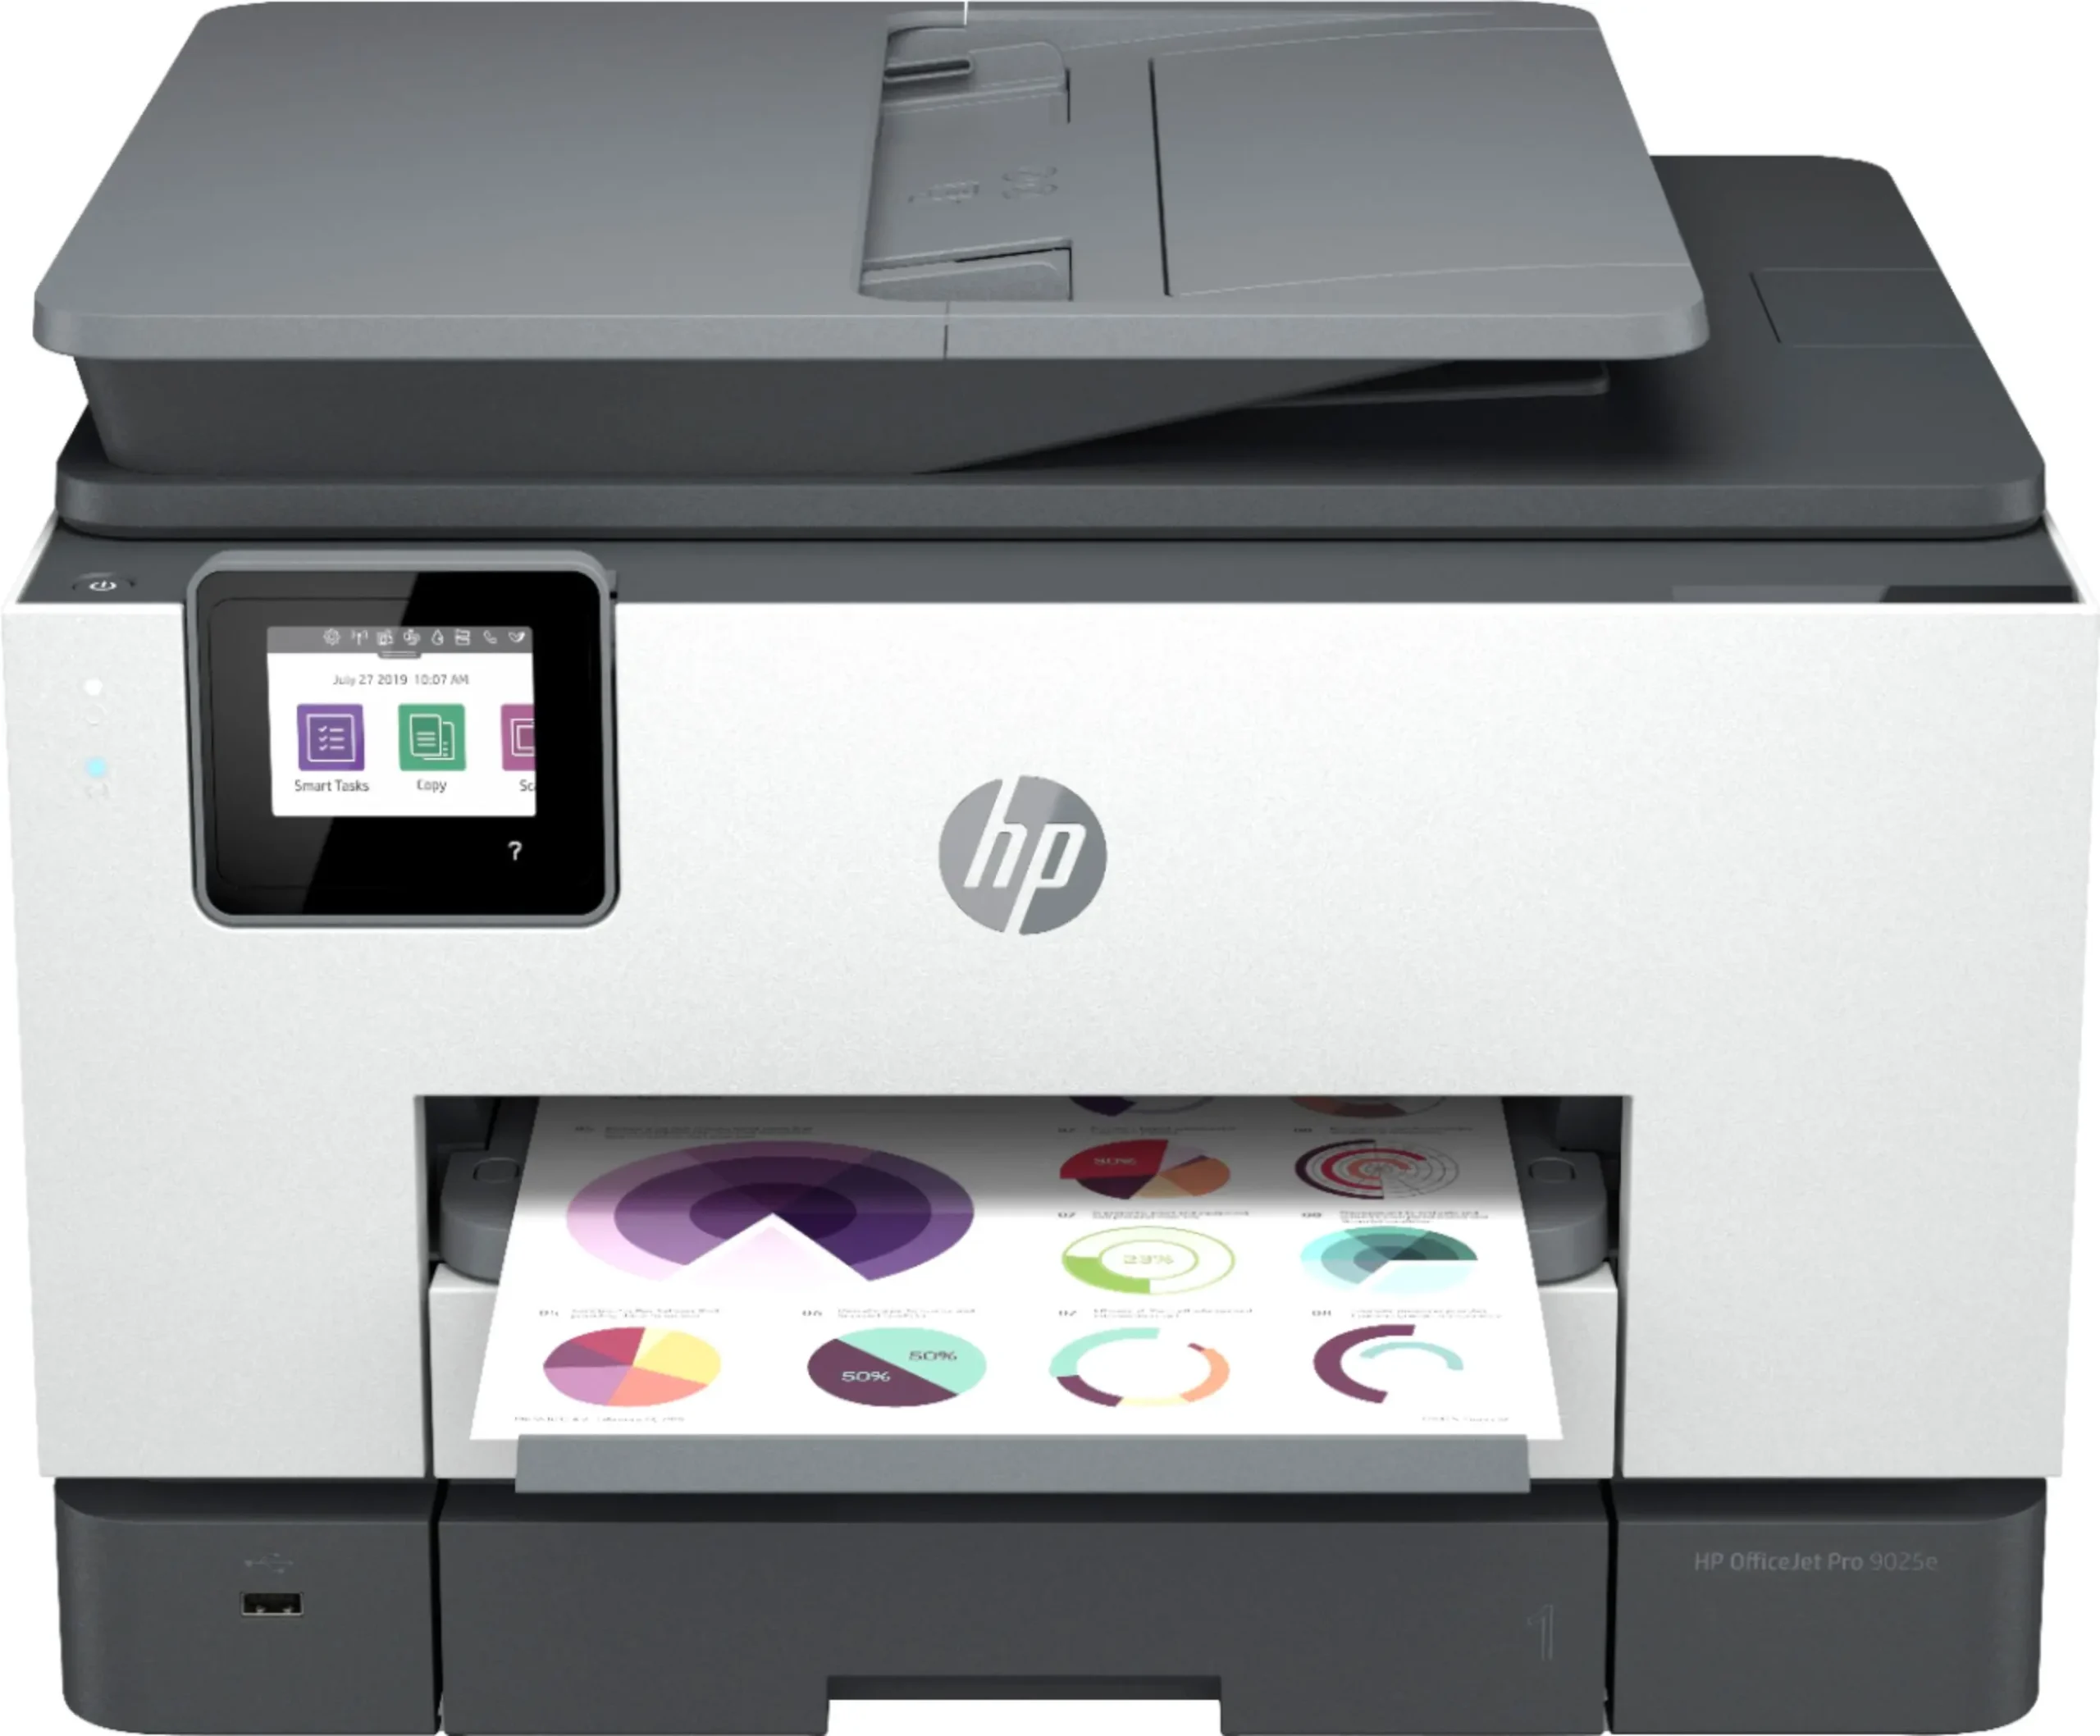 hewlett packard wifi printers - How do I connect my HP printer with Wi-Fi